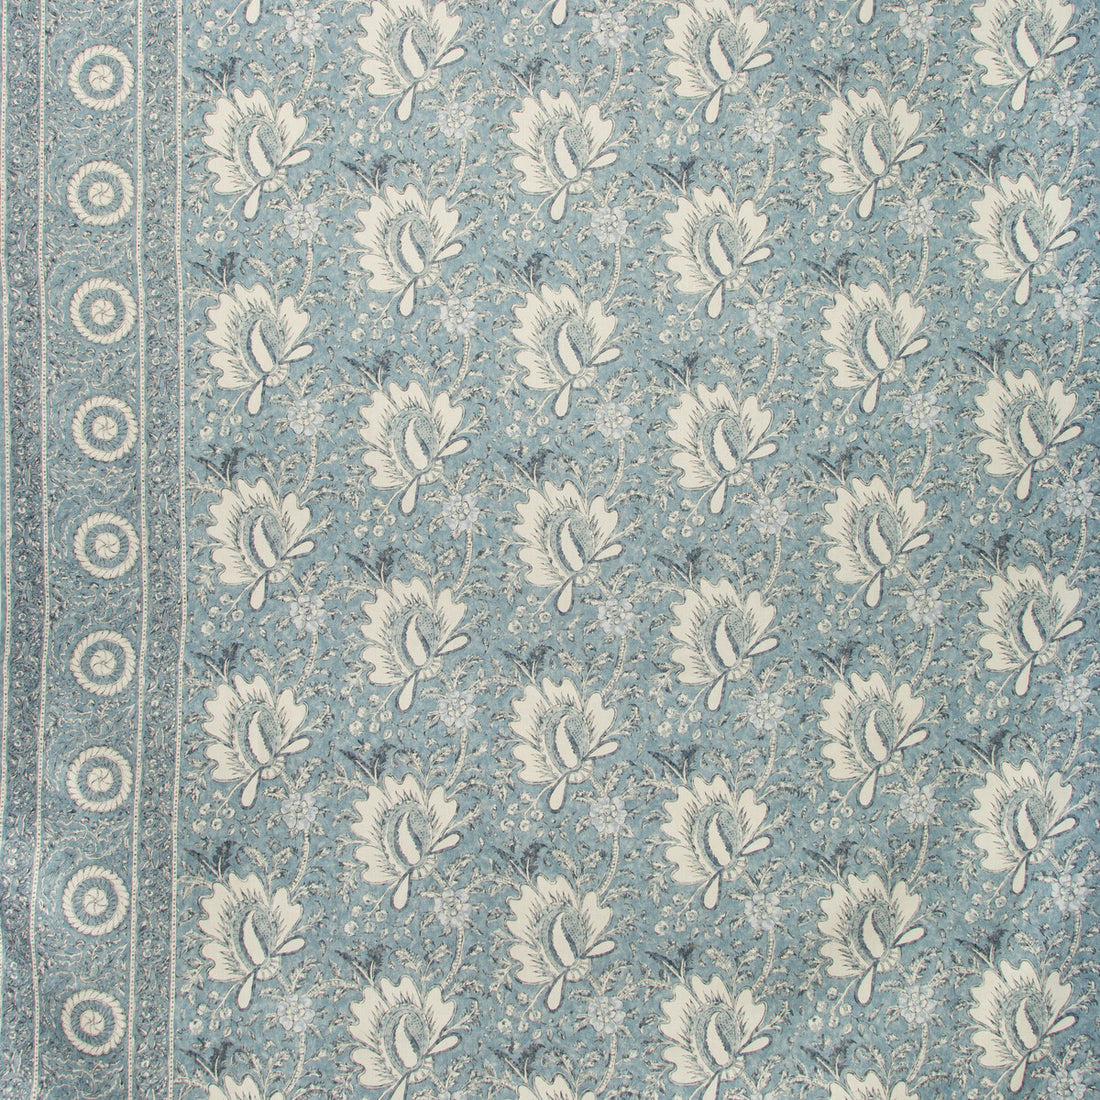 Dove Meadow fabric in denim color - pattern 2019150.50.0 - by Lee Jofa in the Carrier And Company collection